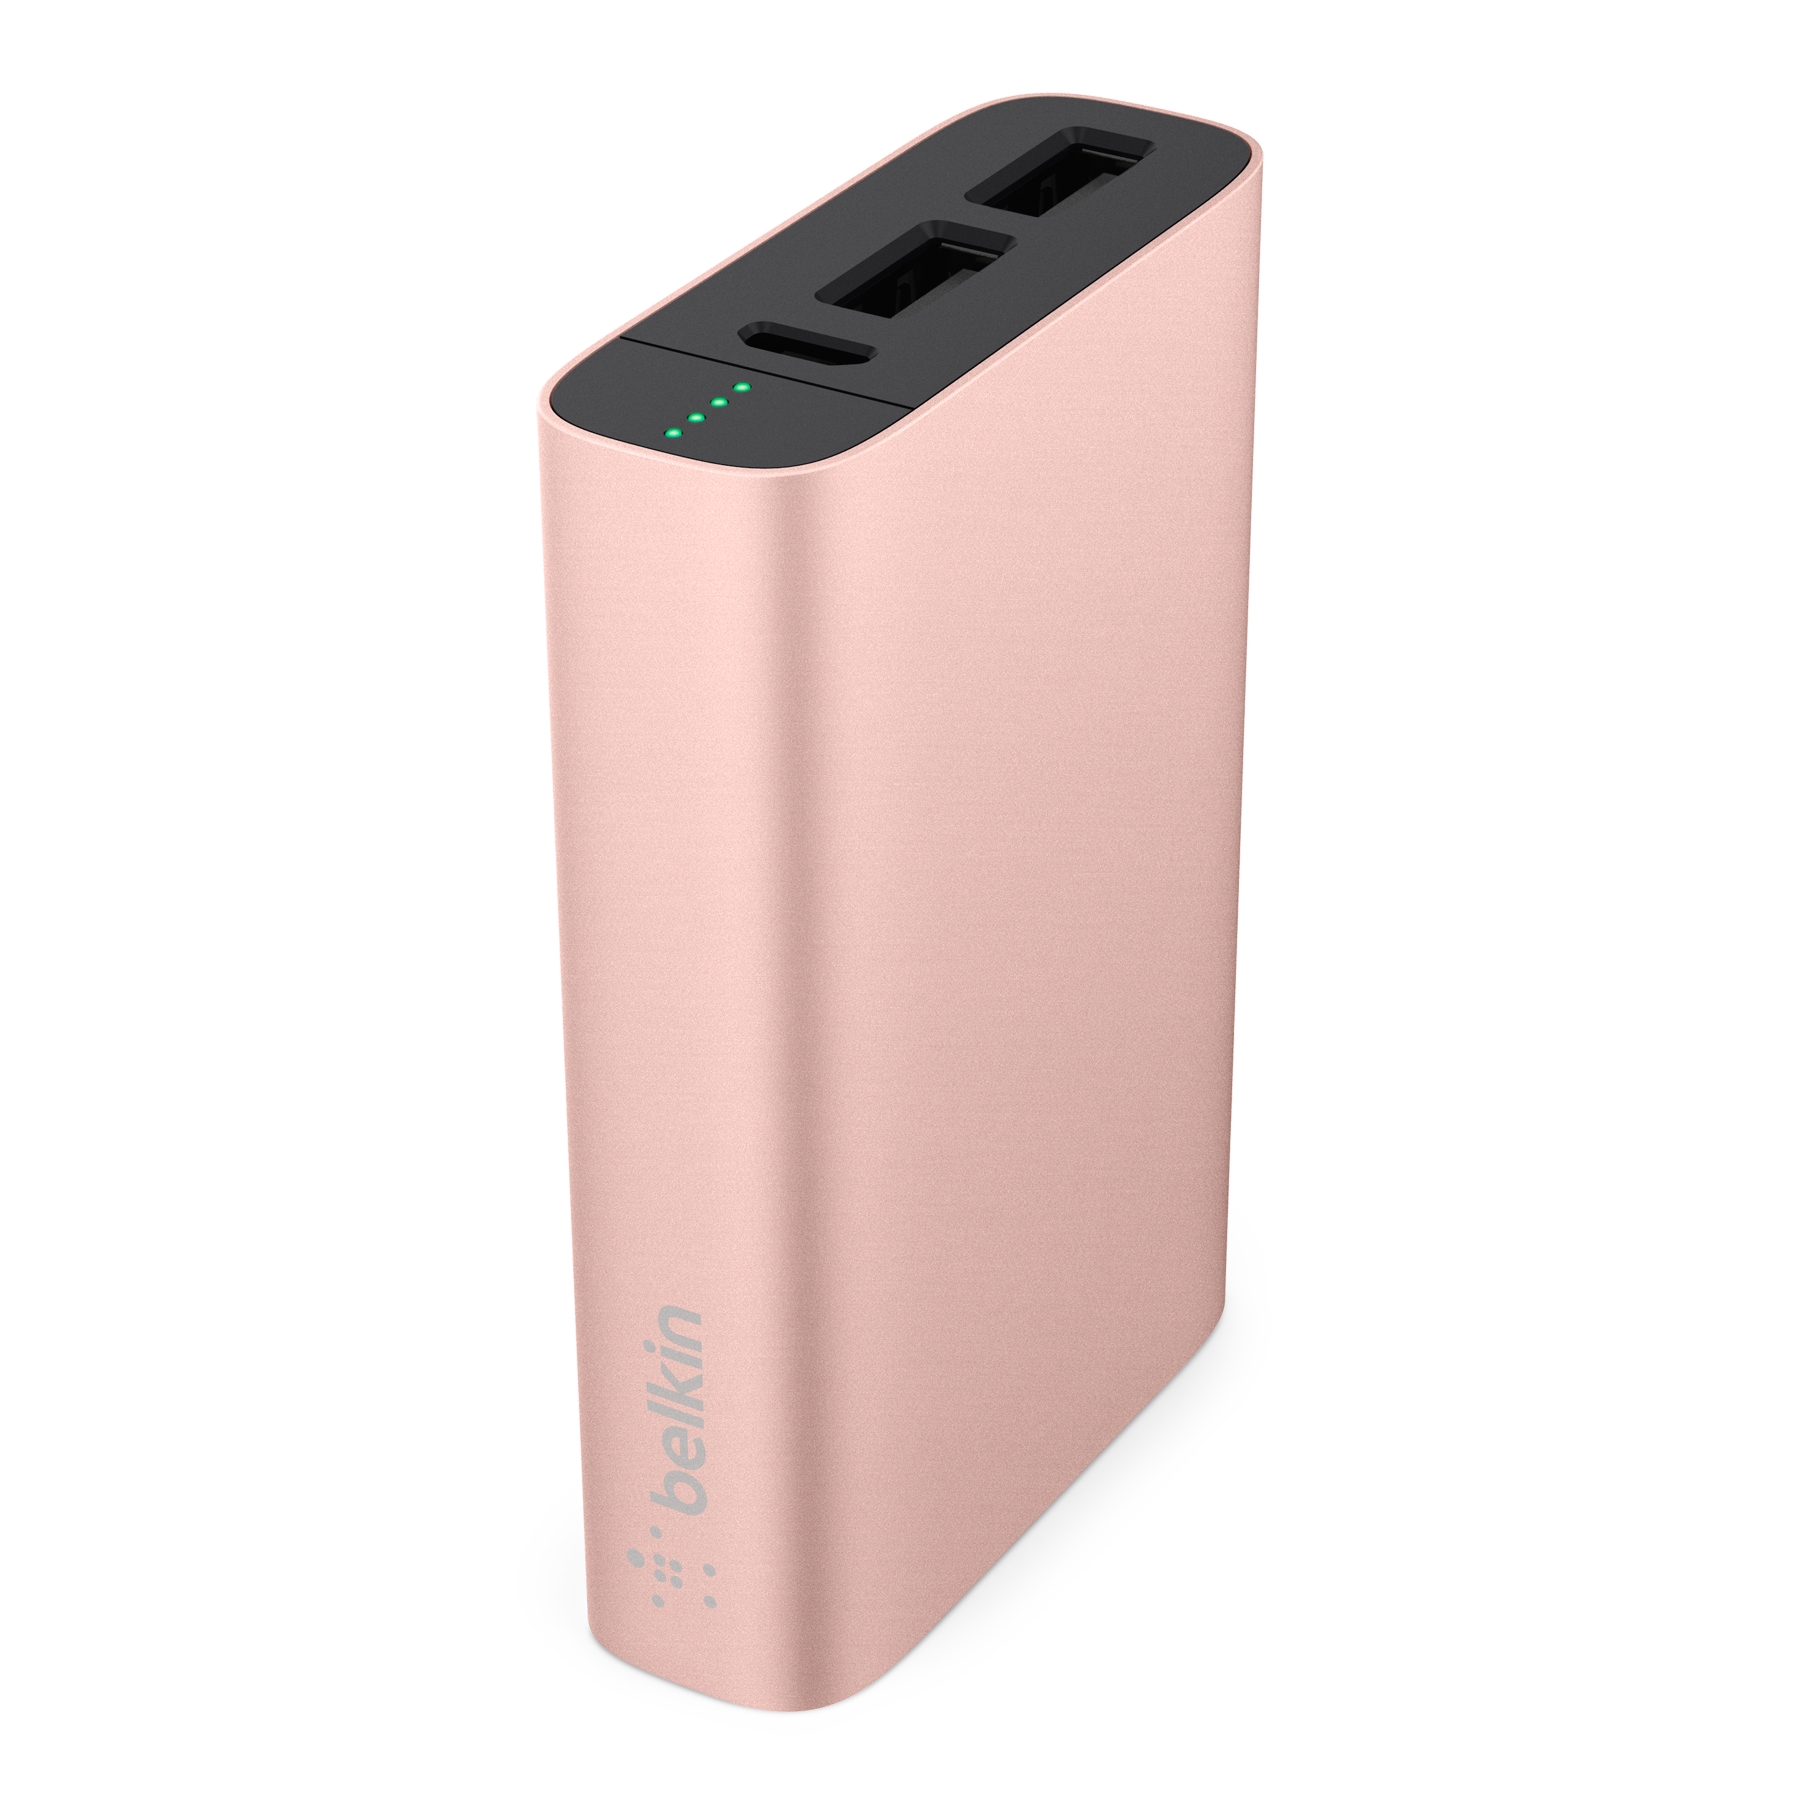 Best portable charger